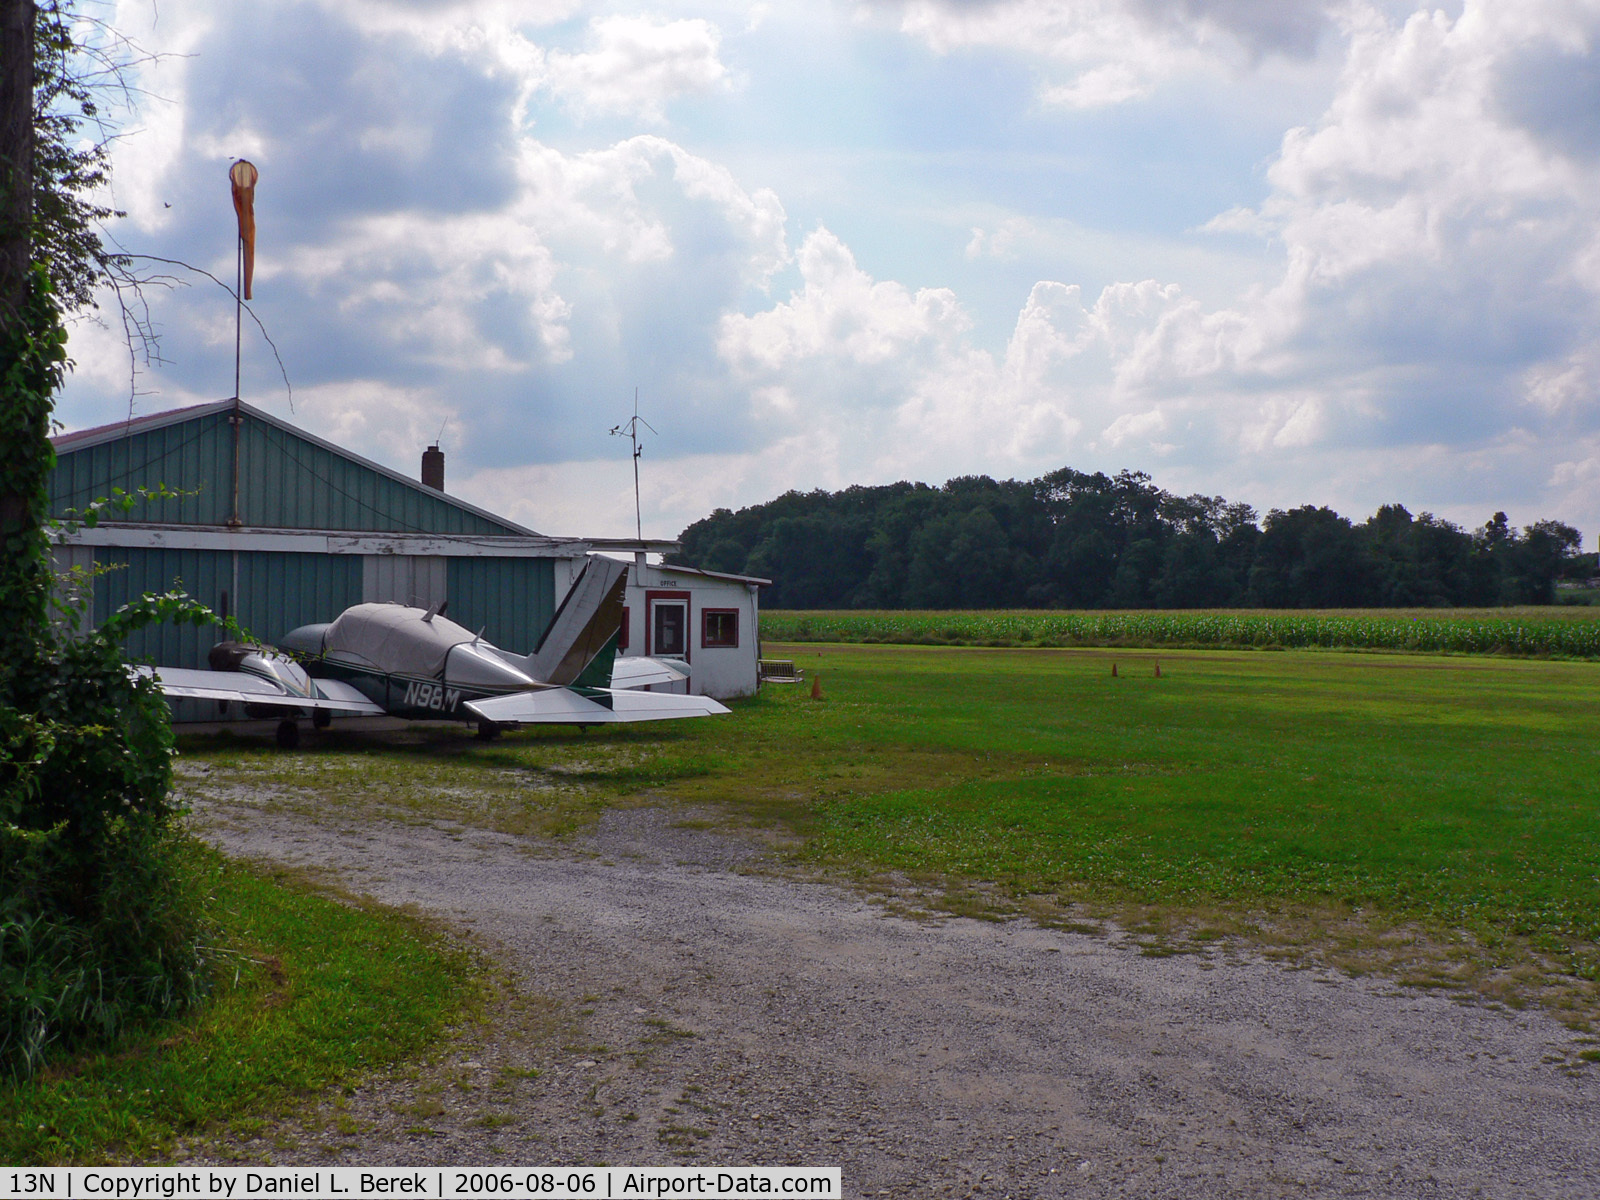 Trinca Airport (13N) - The modest office and the grass strip both lend a very rural feel to this little airport.